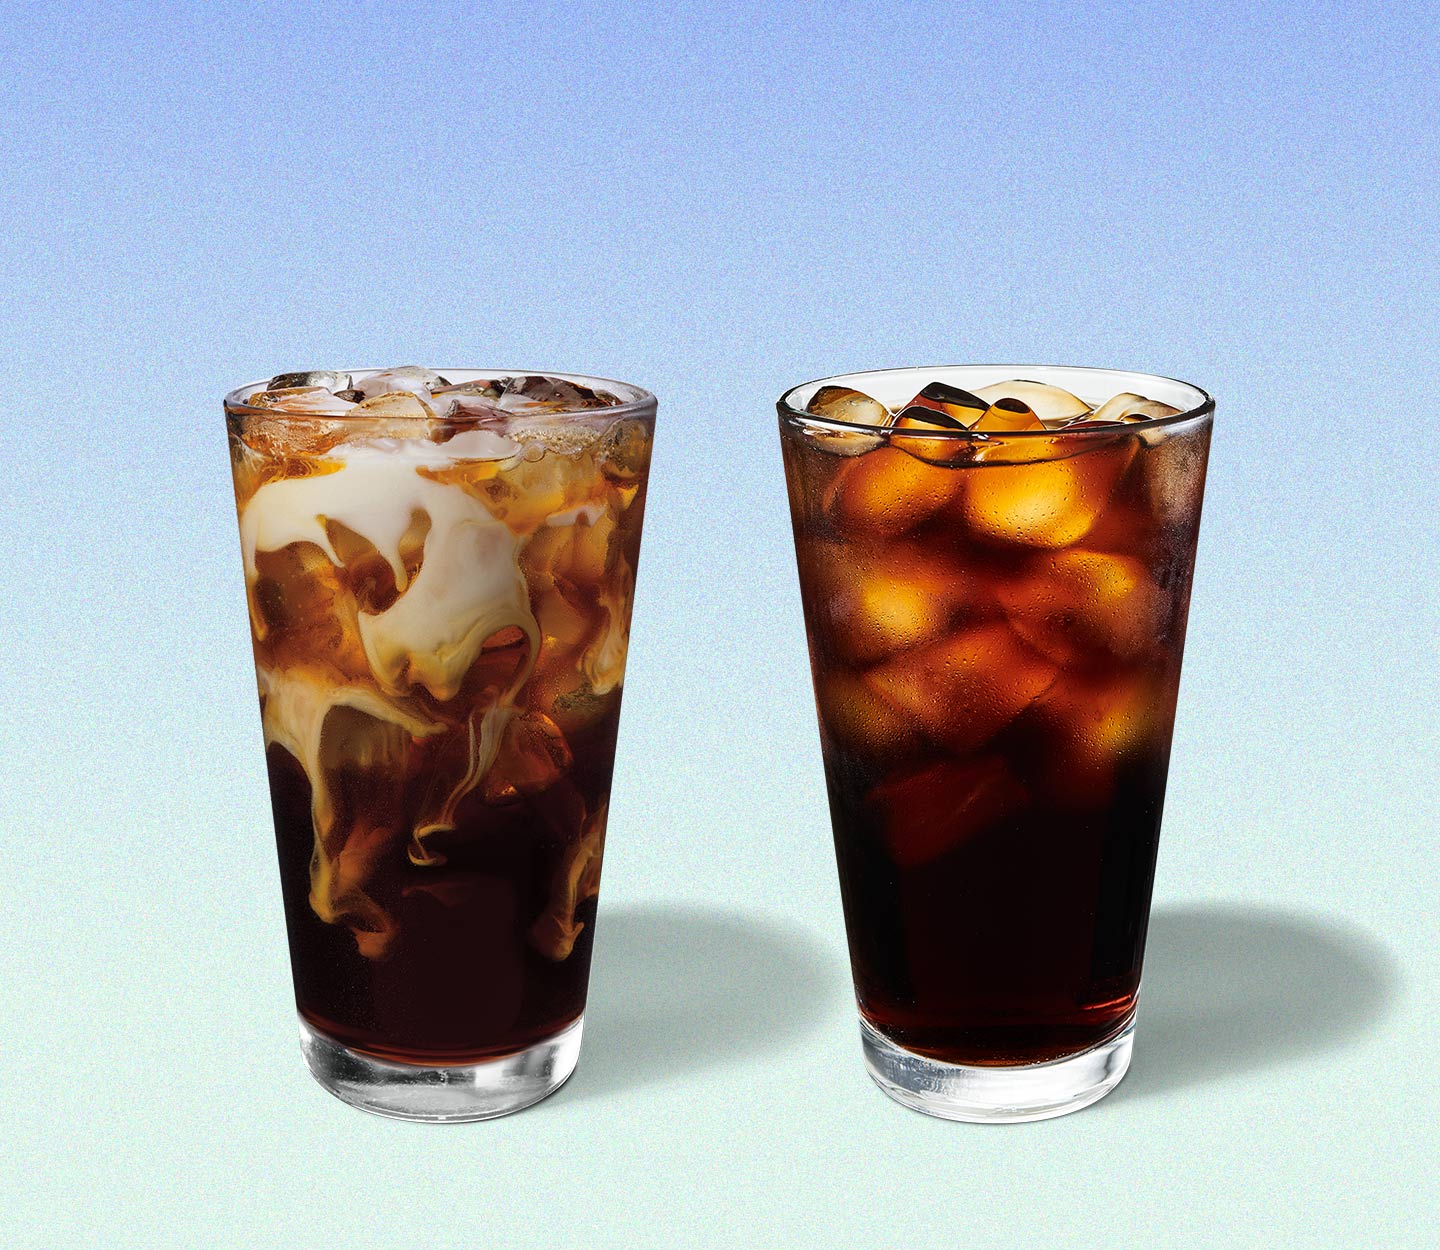 Marbled, iced coffee drink next to a second iced coffee drink. Both are served in tall glasses.